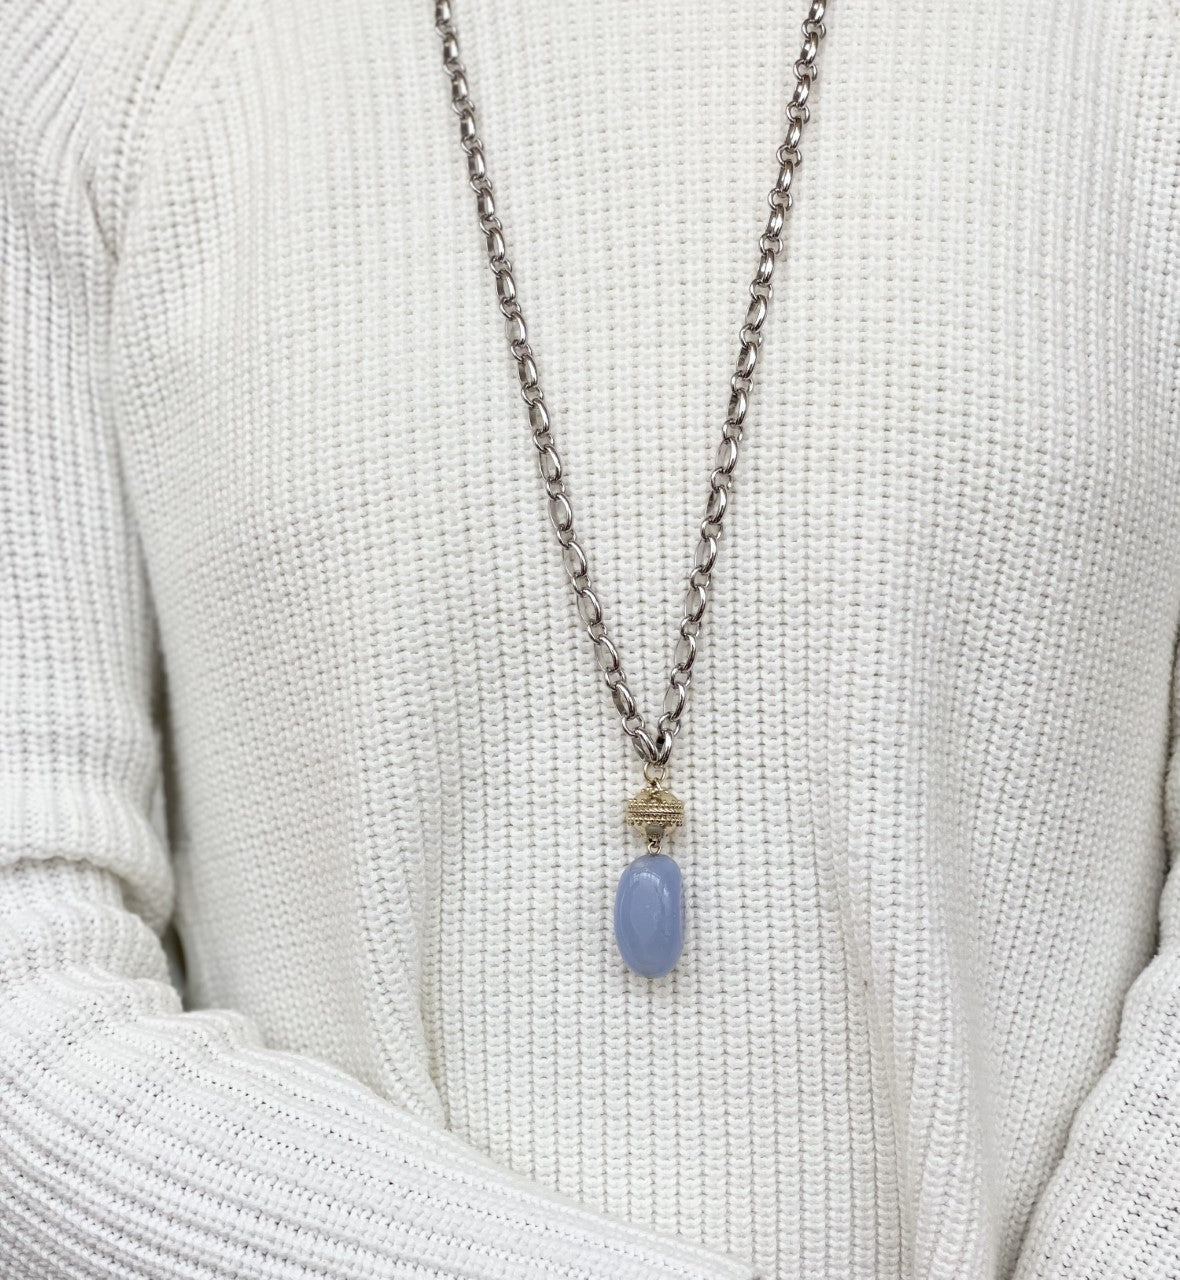 Chalcedony Tumbled Nugget Tag